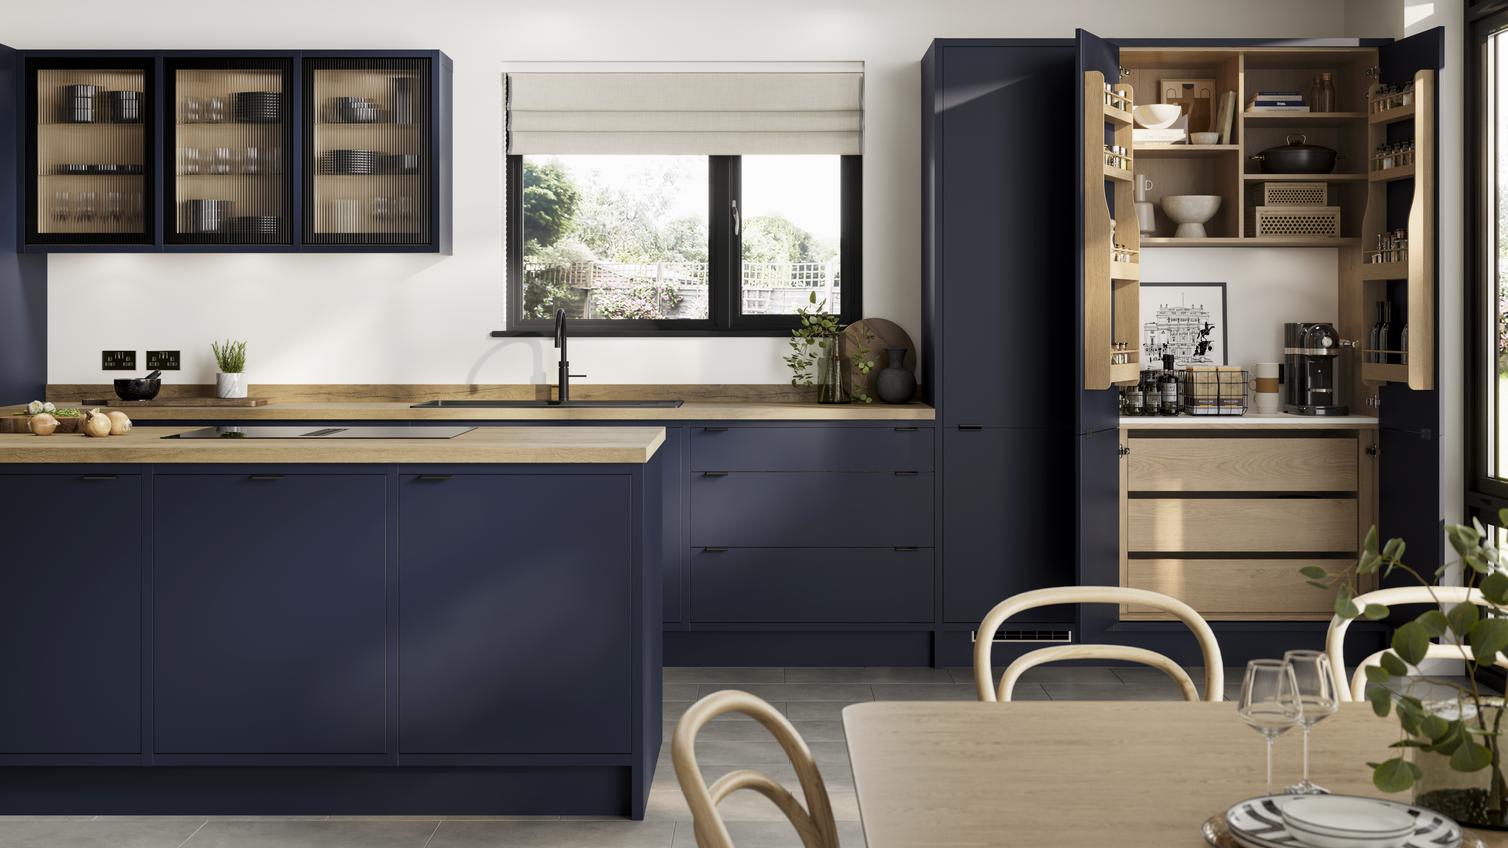 A contemporary blue kitchen with in-frame slab doors, white worktops, black handles, and glass units in an L-shape layout.